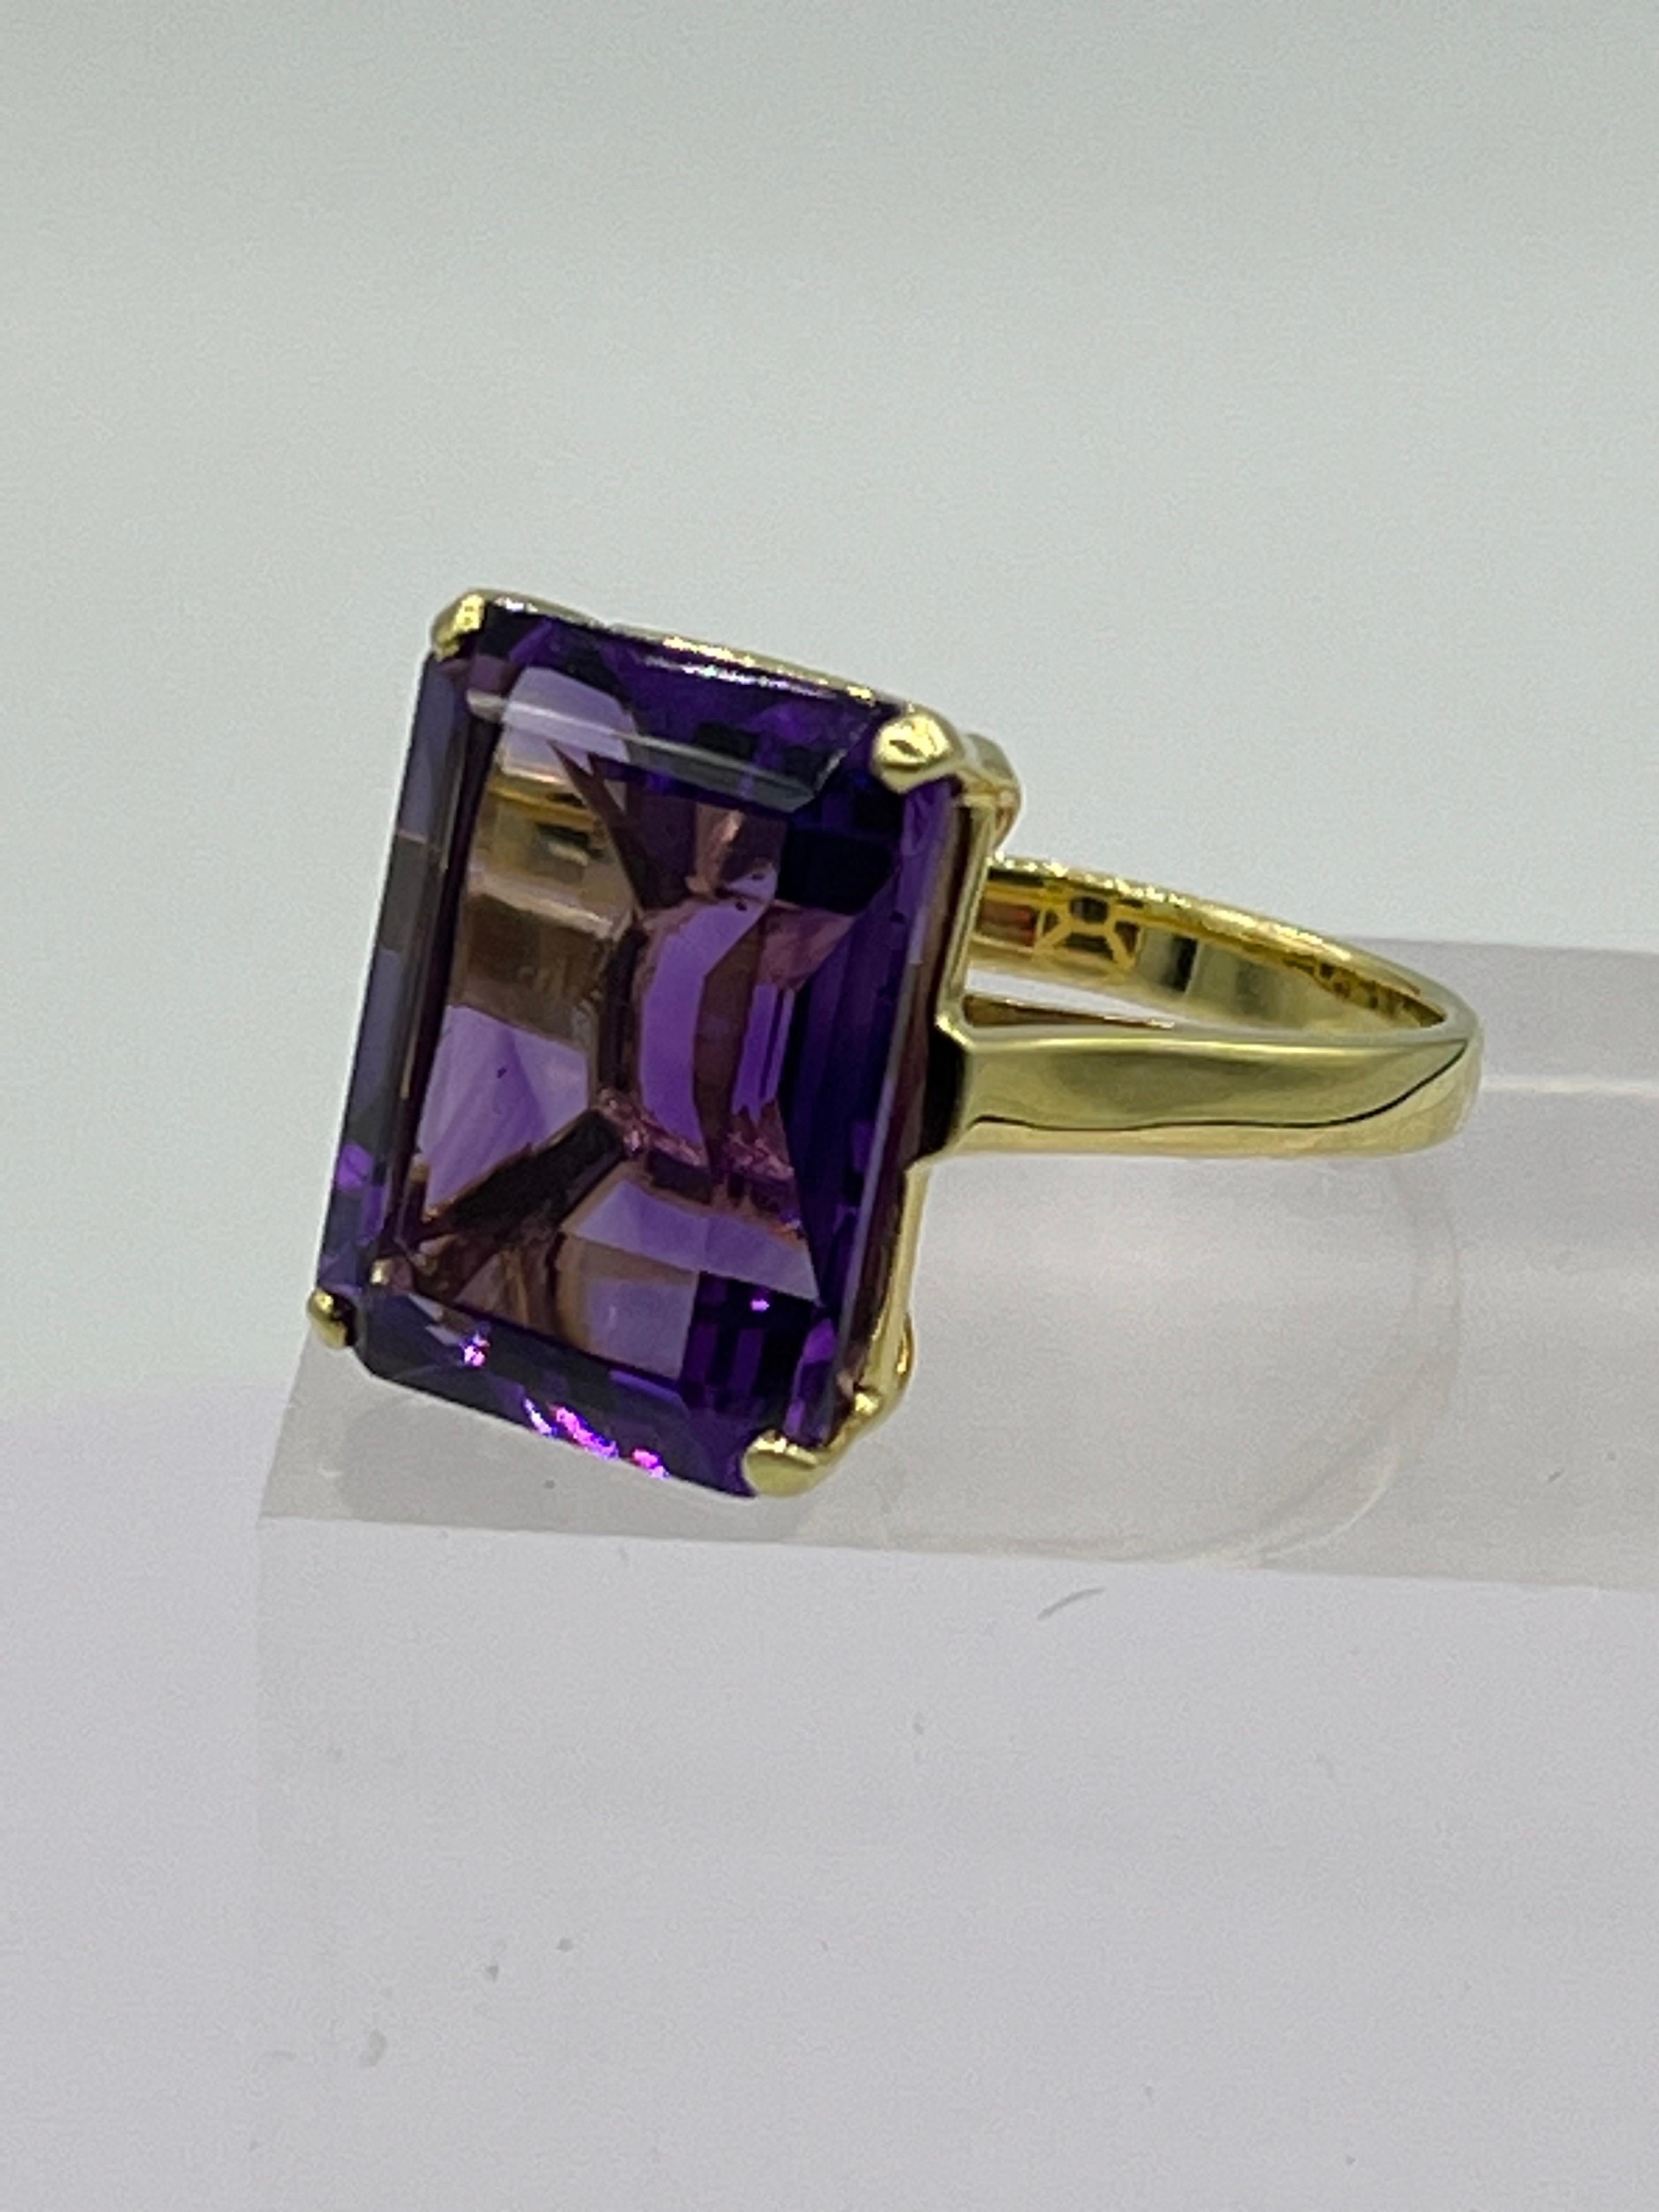 13ct Amethyst Ring in 14 K Gold In New Condition For Sale In Bad Kissingen, DE